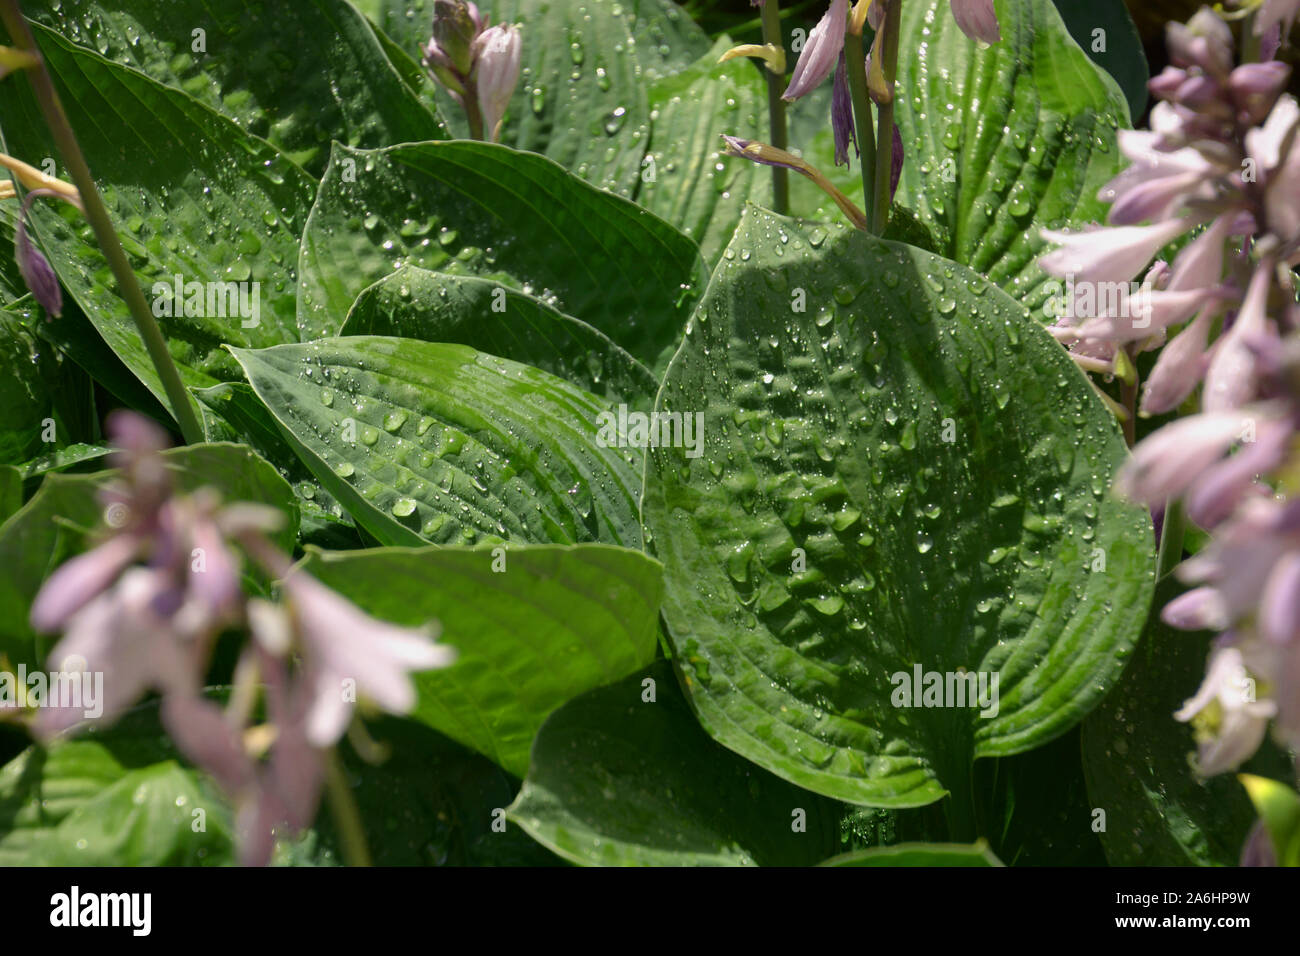 leaves of hosta with droplets of water with lotus effects, purple flowering hosta or hostas with rain drops in summer garden Stock Photo